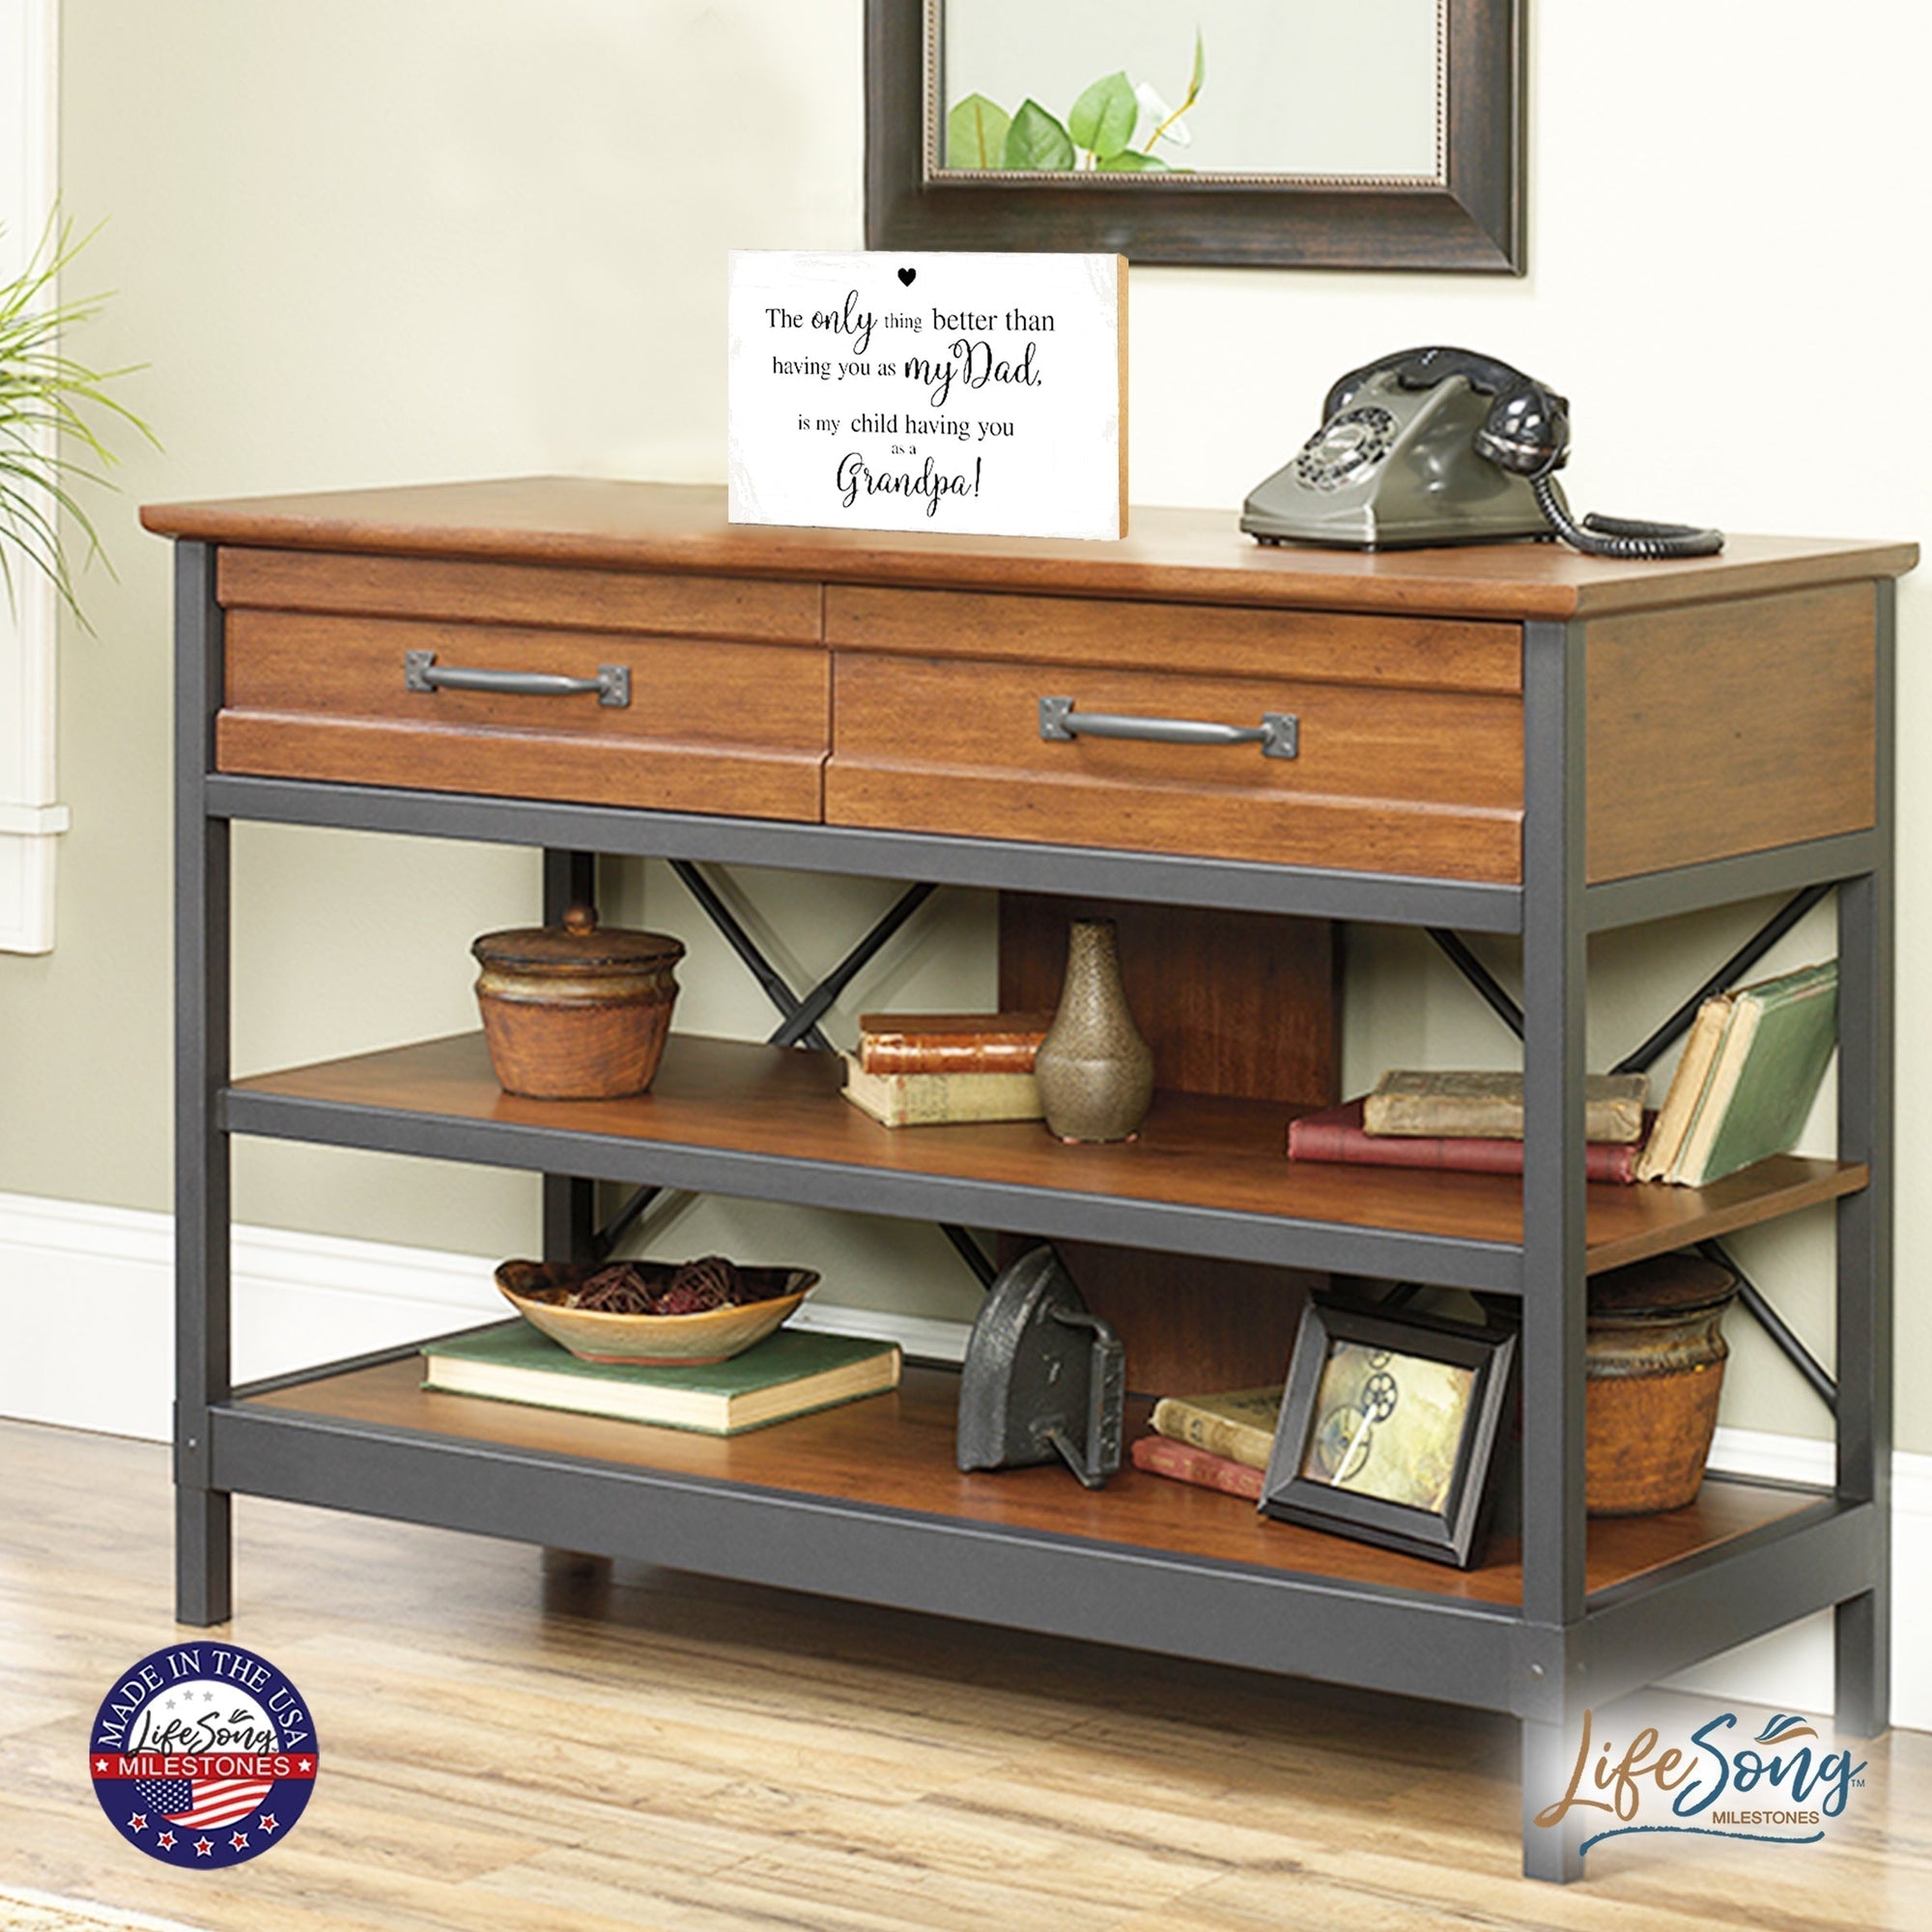 Unique shelf décor for your beloved grandfather, a special gift table decor.